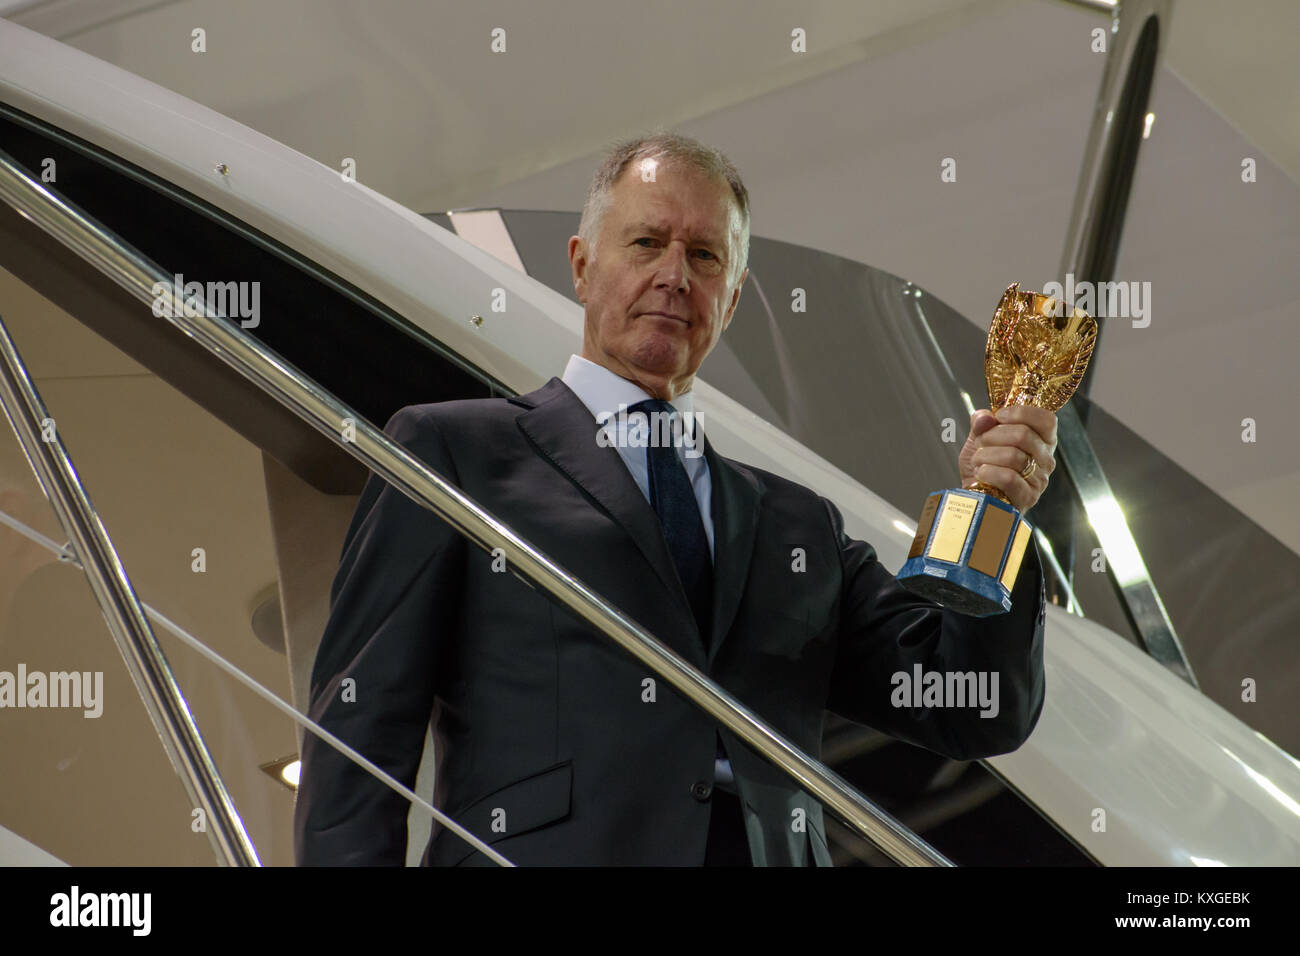 ExCel, London, UK. 10 January, 2018. Sir Geoff Hurst at the Sunseeker stand at the London Boat Show, clucthing the Jules Rimet World Cup trophy. Credit: Neil Doyle/Alamy Live News. Stock Photo